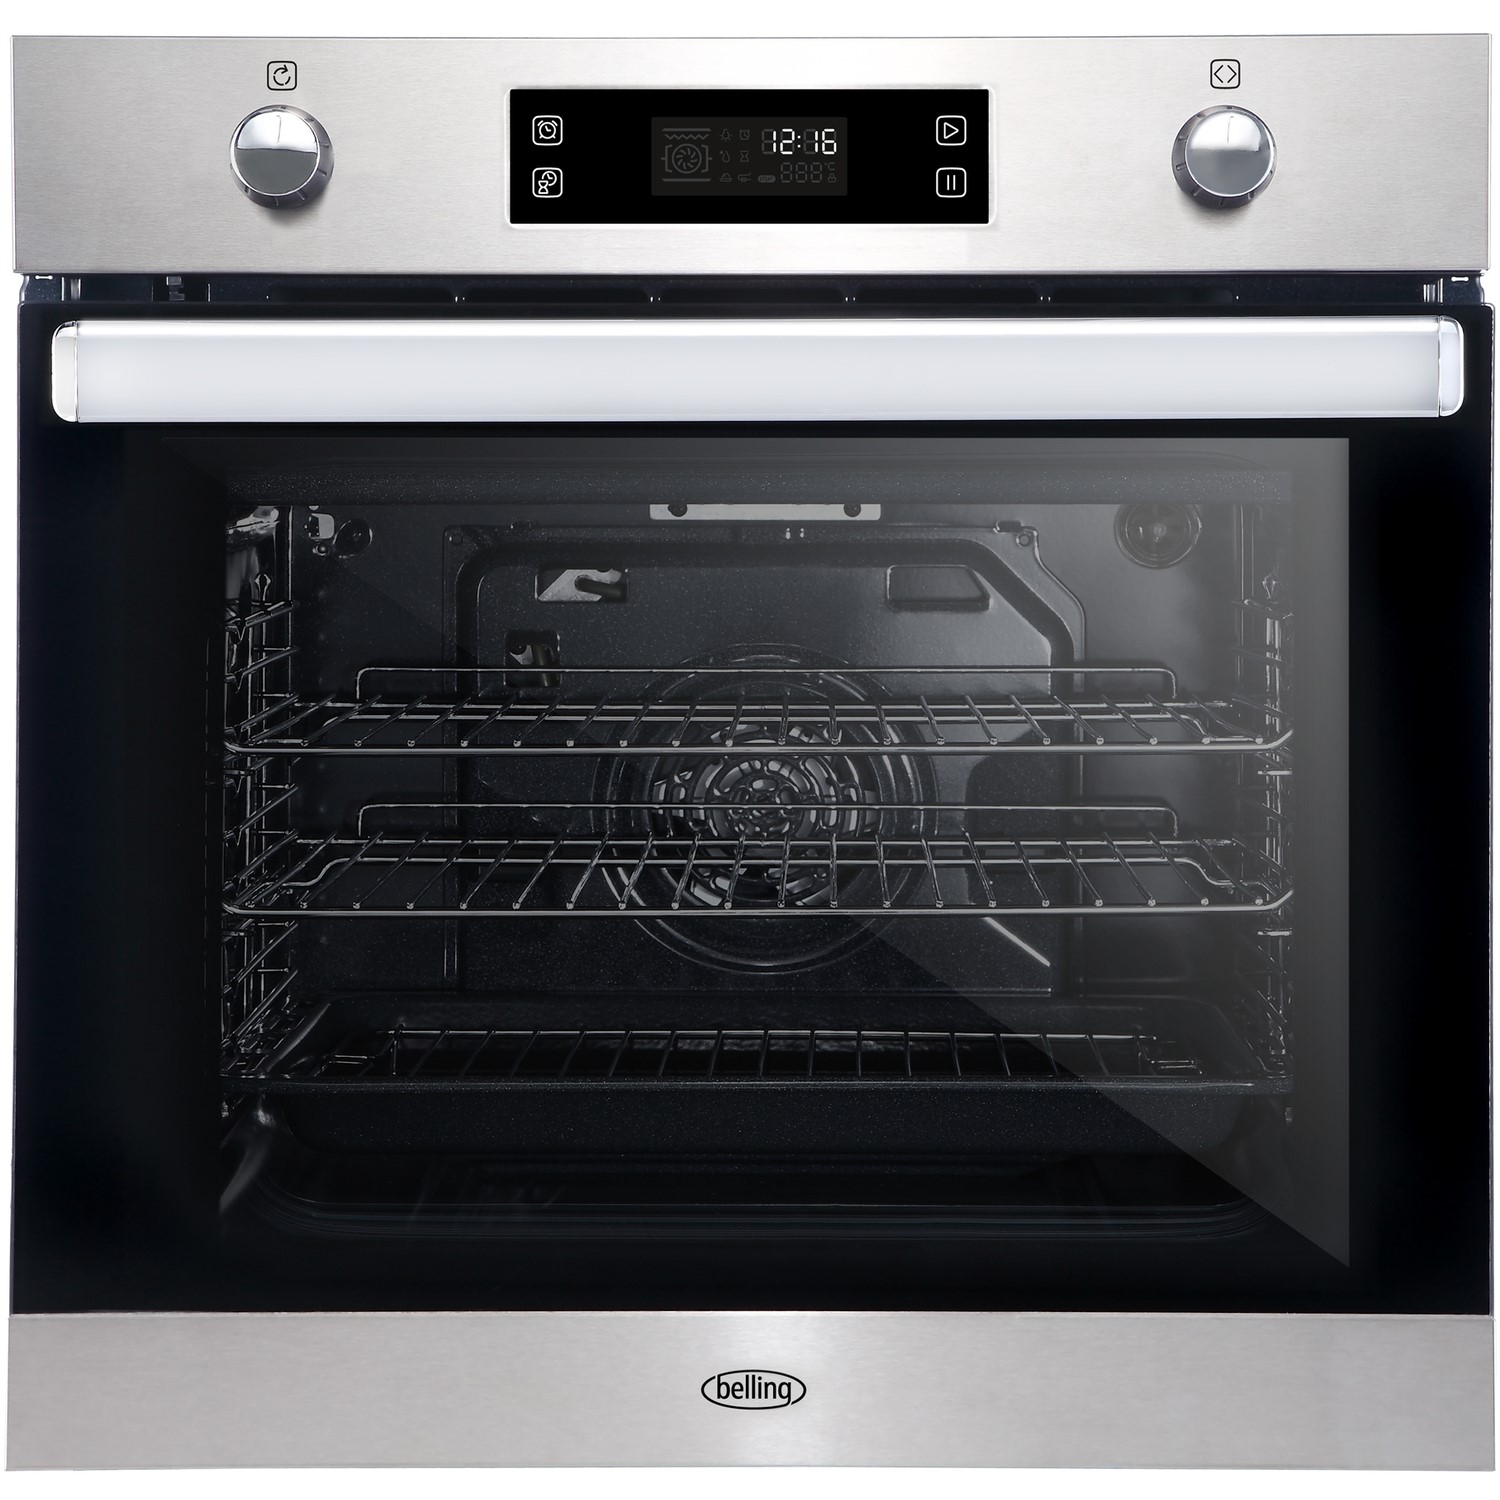 Belling BI602MFPY 73L Built-in Multifunction Single Oven With Pyrolytic Cleaning - Black